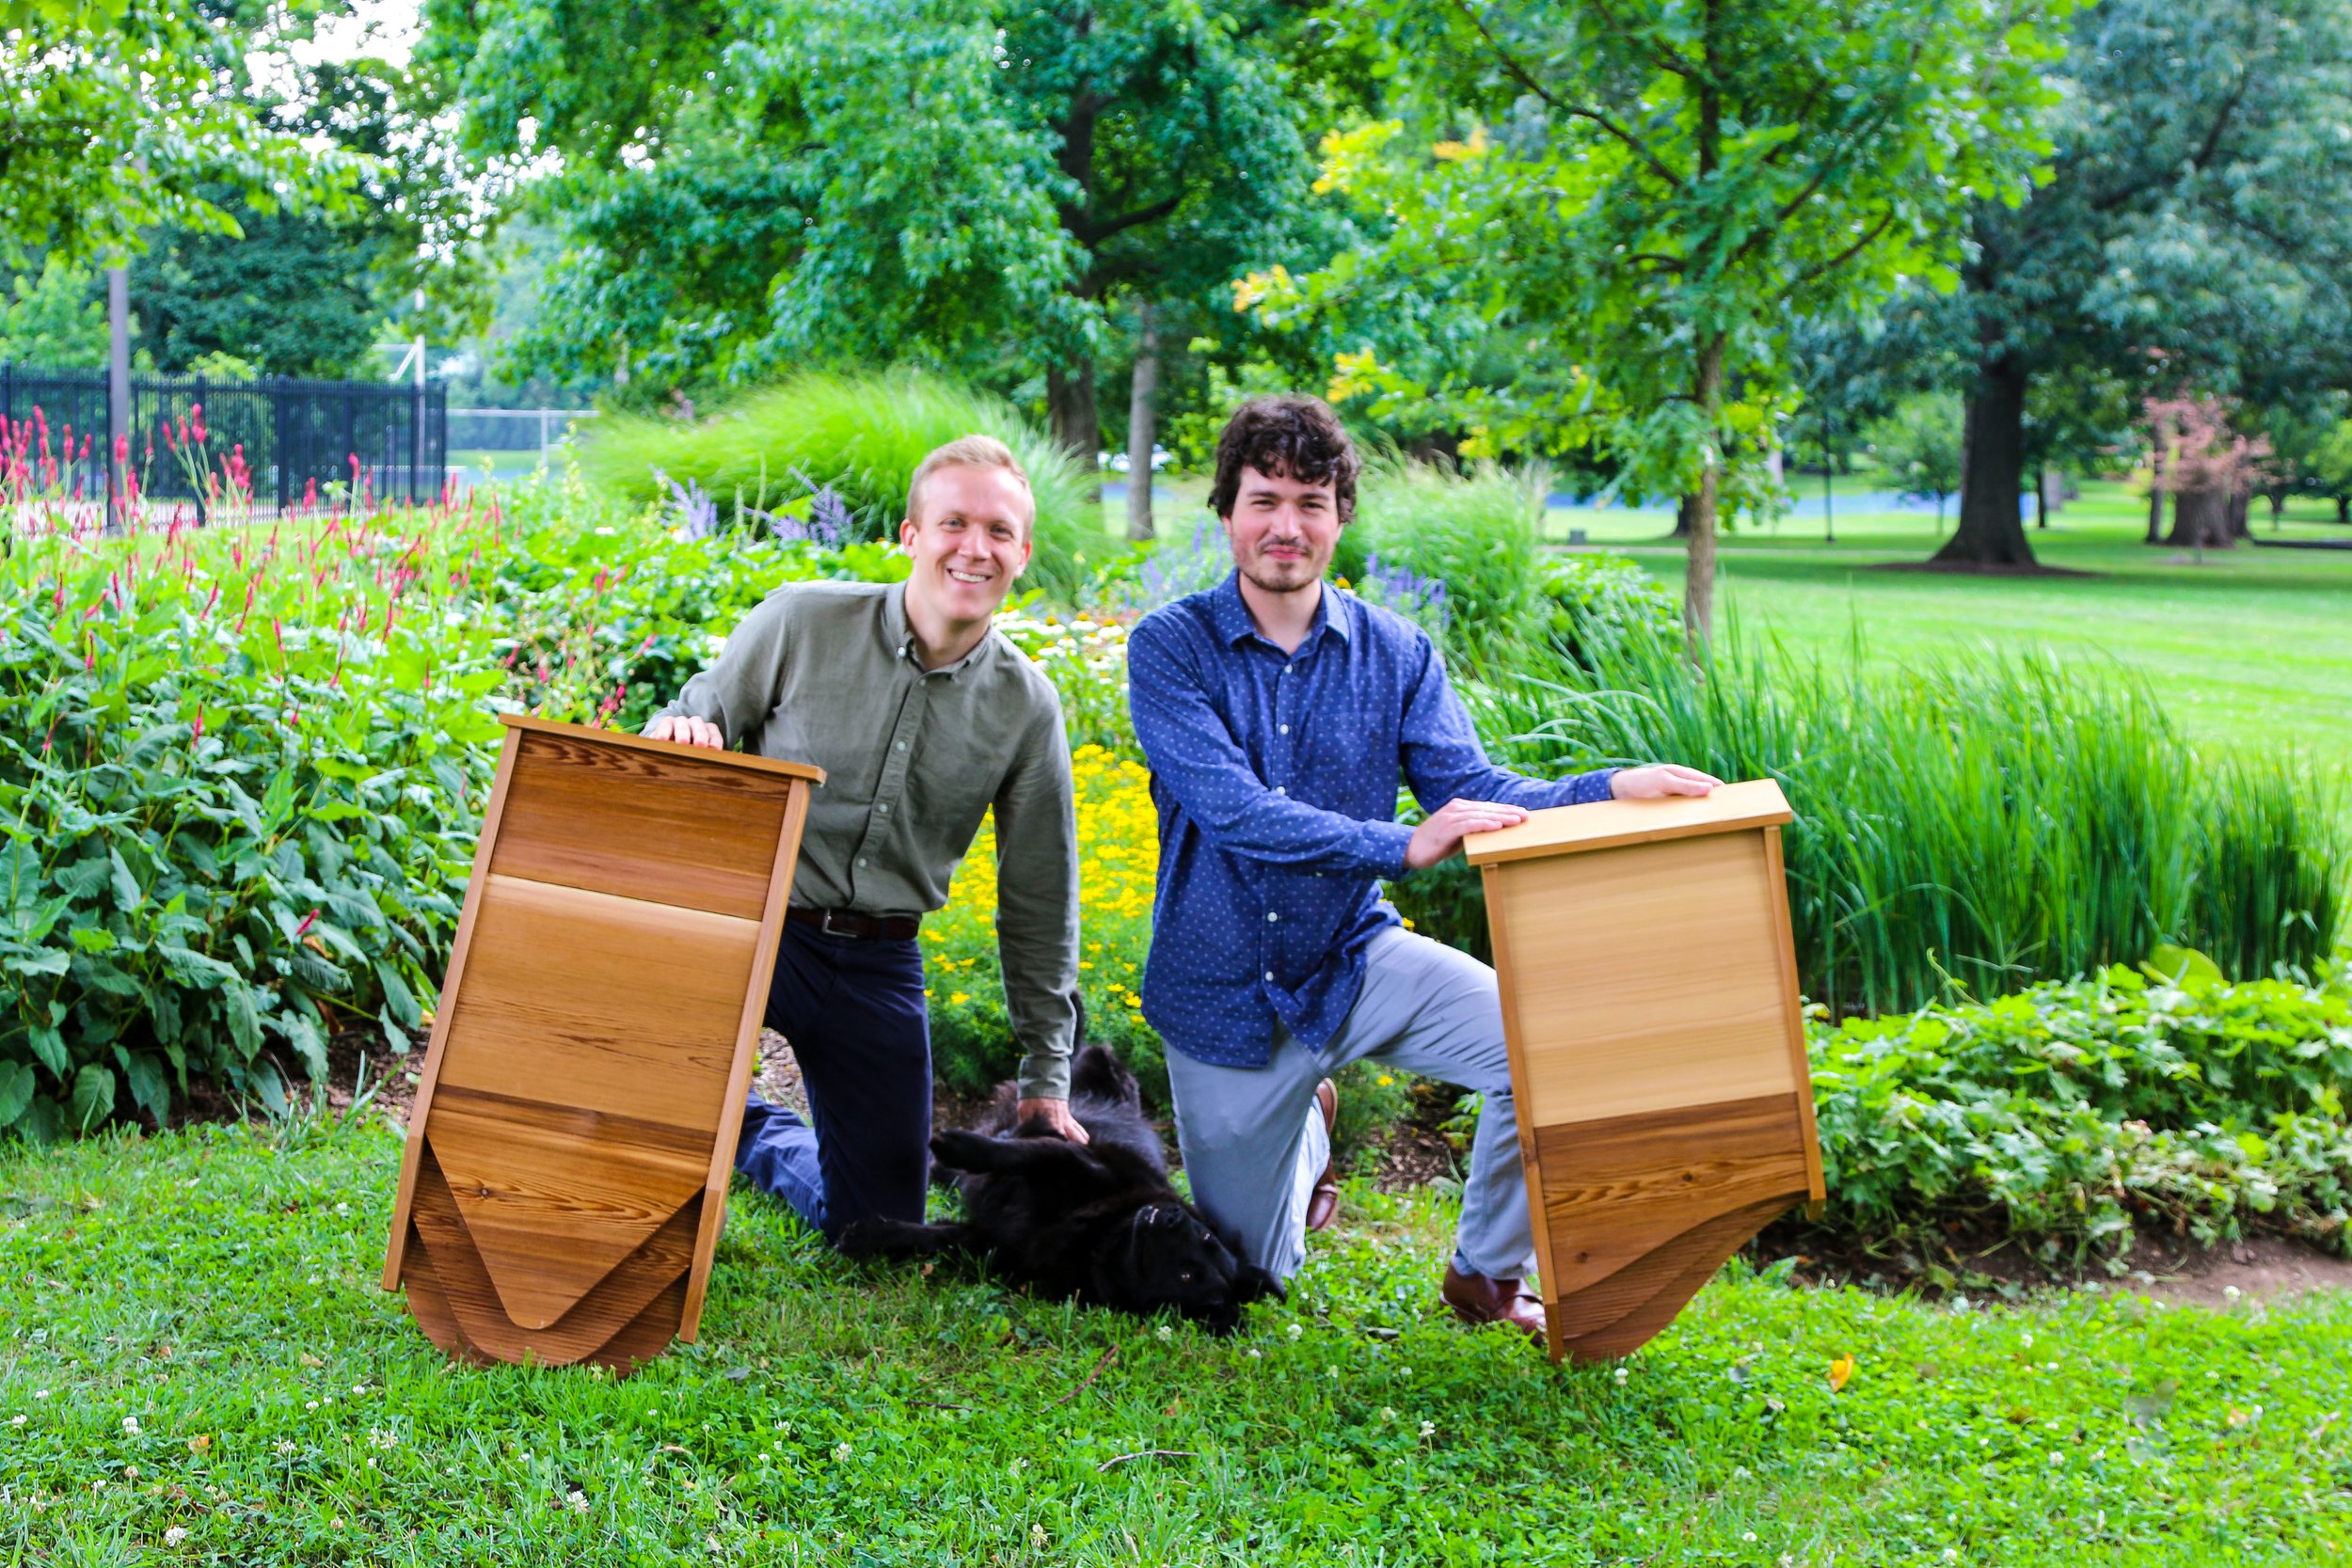 Bat houses are the perfect way to reduce mosquitoes in your yard